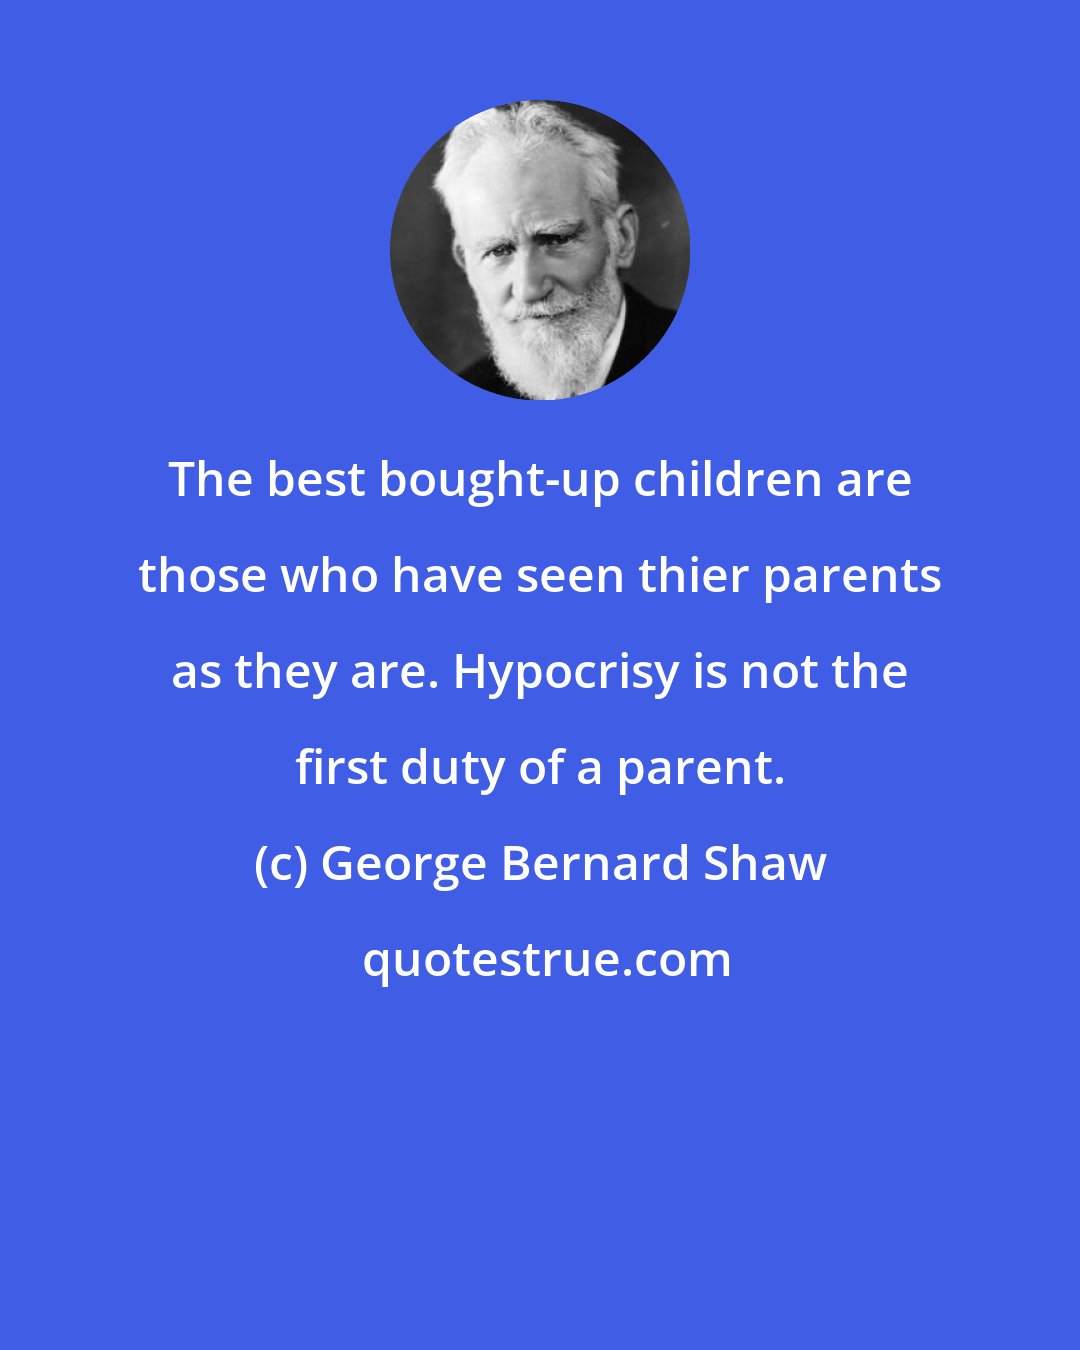 George Bernard Shaw: The best bought-up children are those who have seen thier parents as they are. Hypocrisy is not the first duty of a parent.